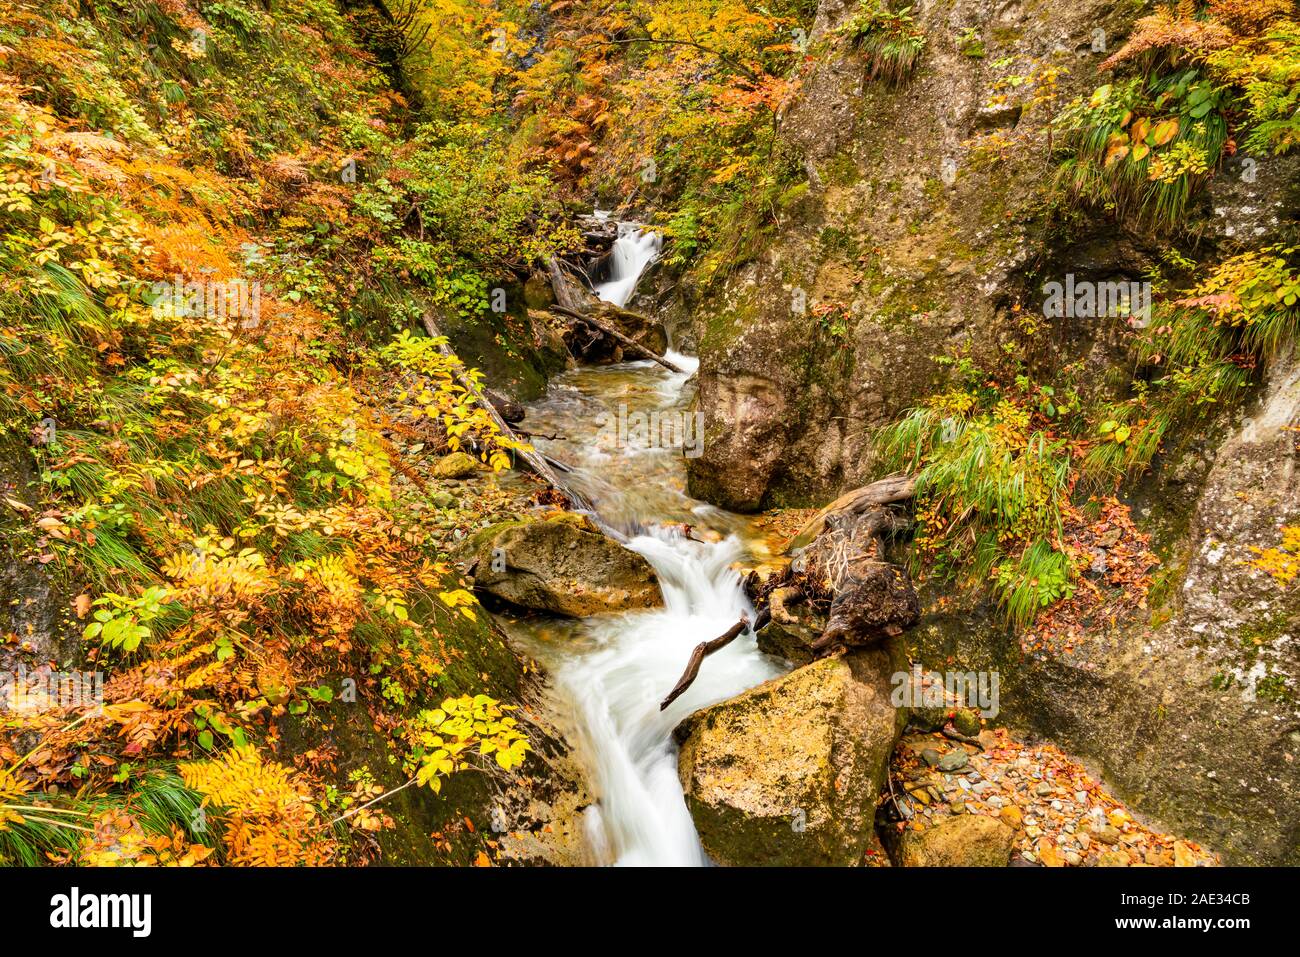 Scenic view of clear natural stream flow passing rocks and colorful foliage of autumn at Naruko City, Miyagi Prefecture, Japan. Stock Photo